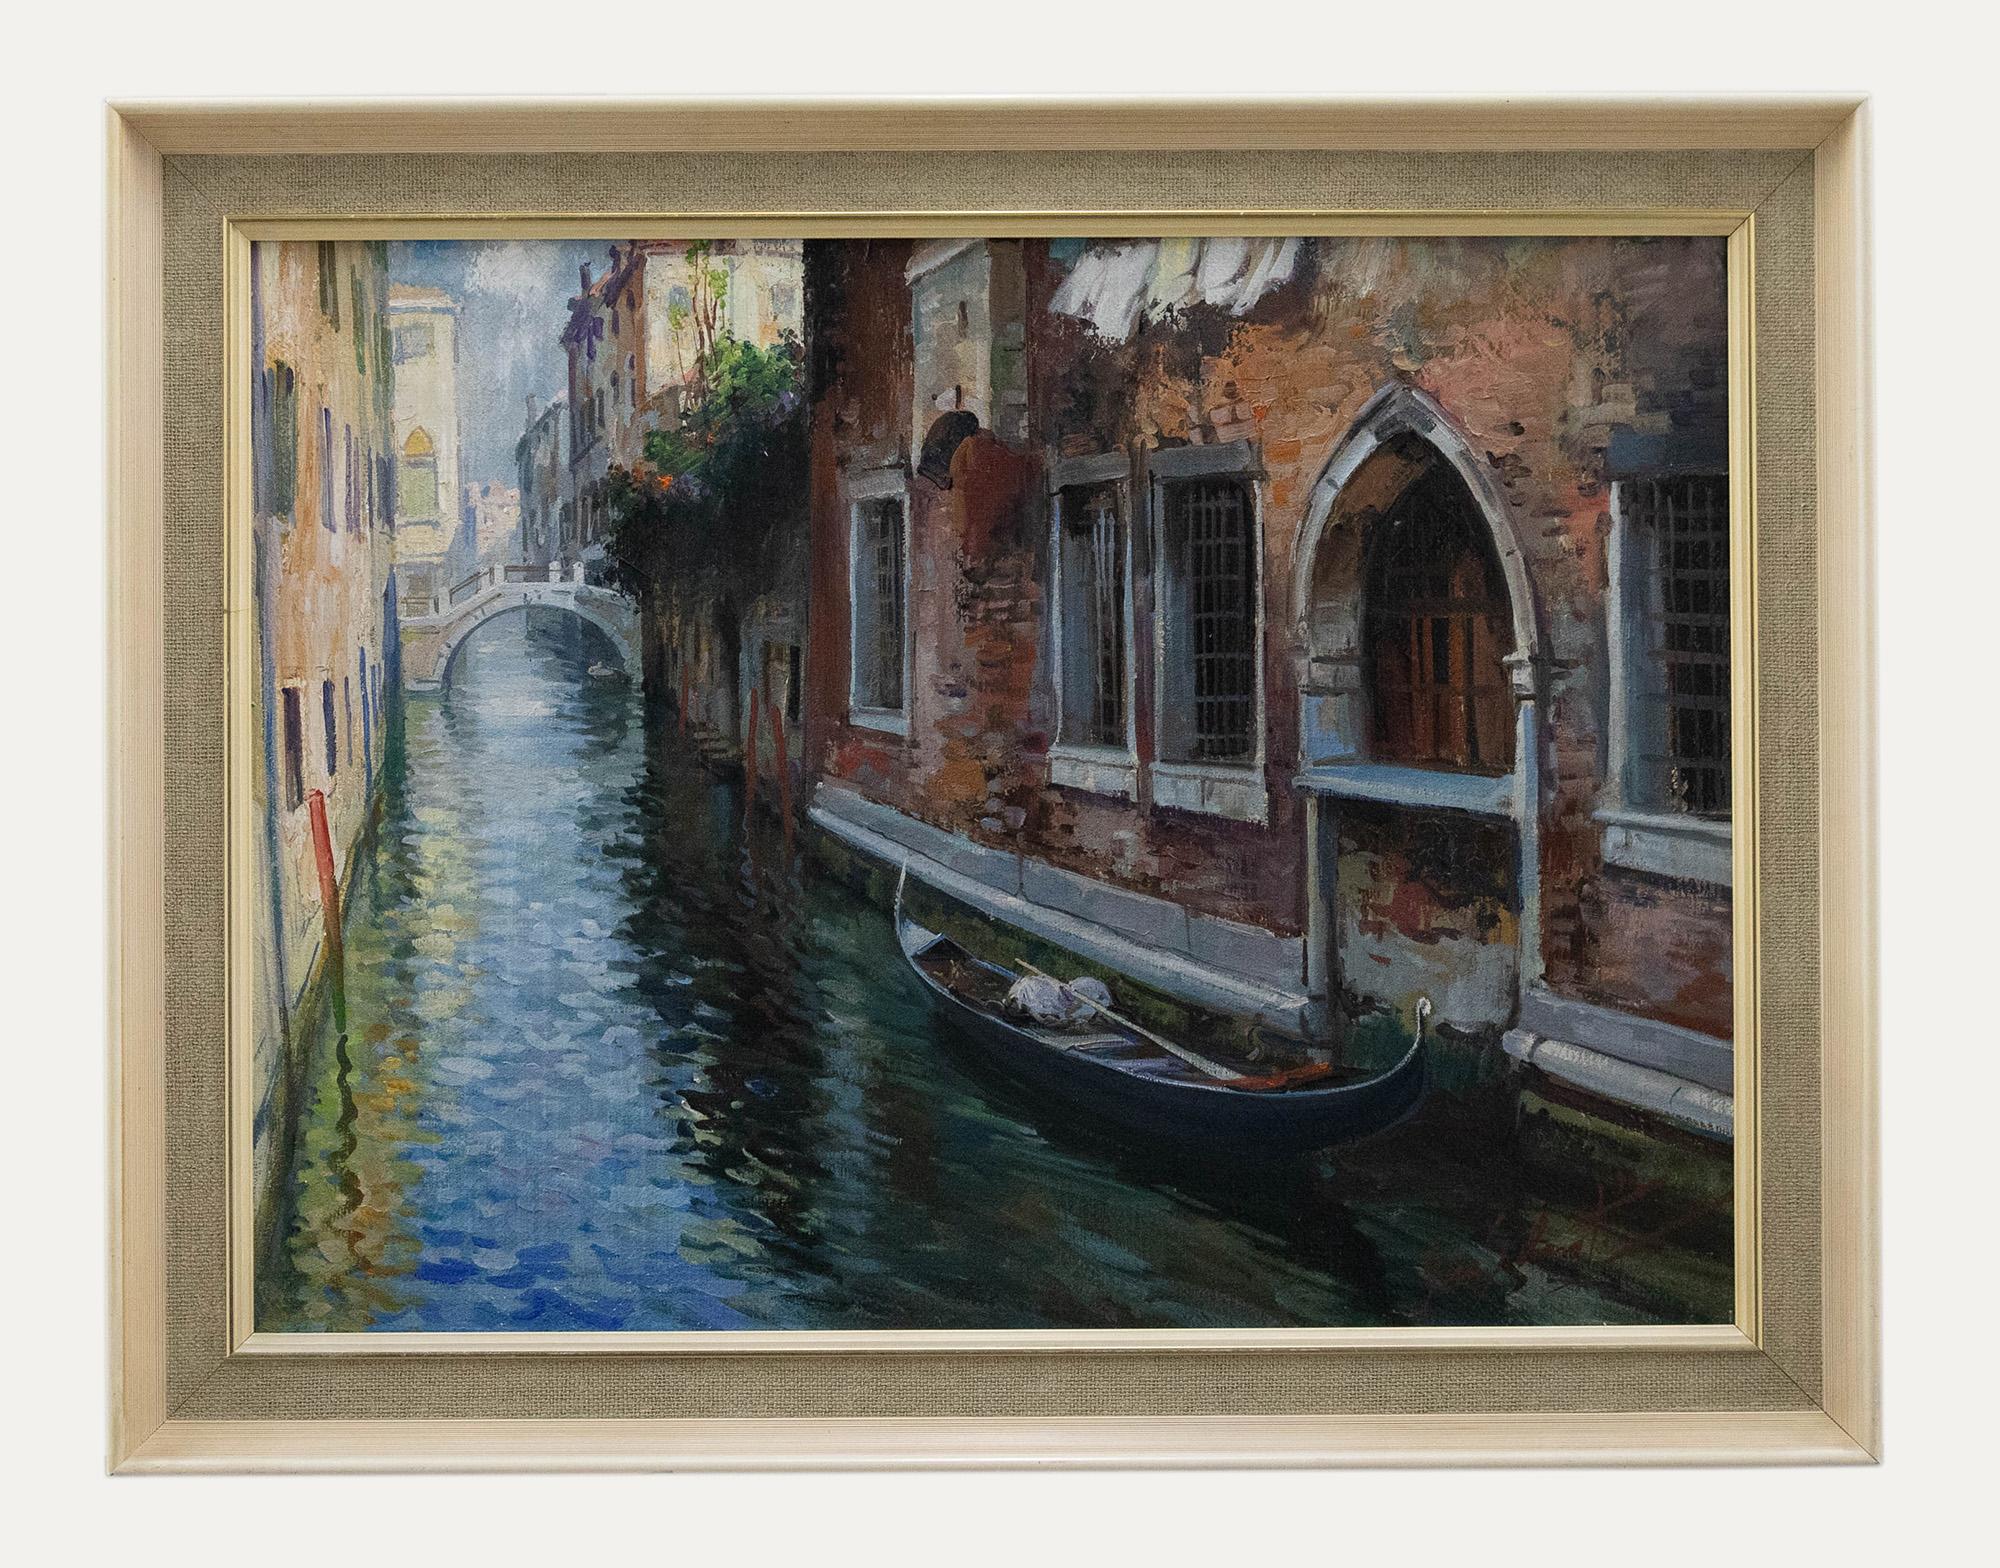 Unknown Landscape Painting - Gino Salviati (1911-1998) - 20th Century Oil, A Venetian Backwater